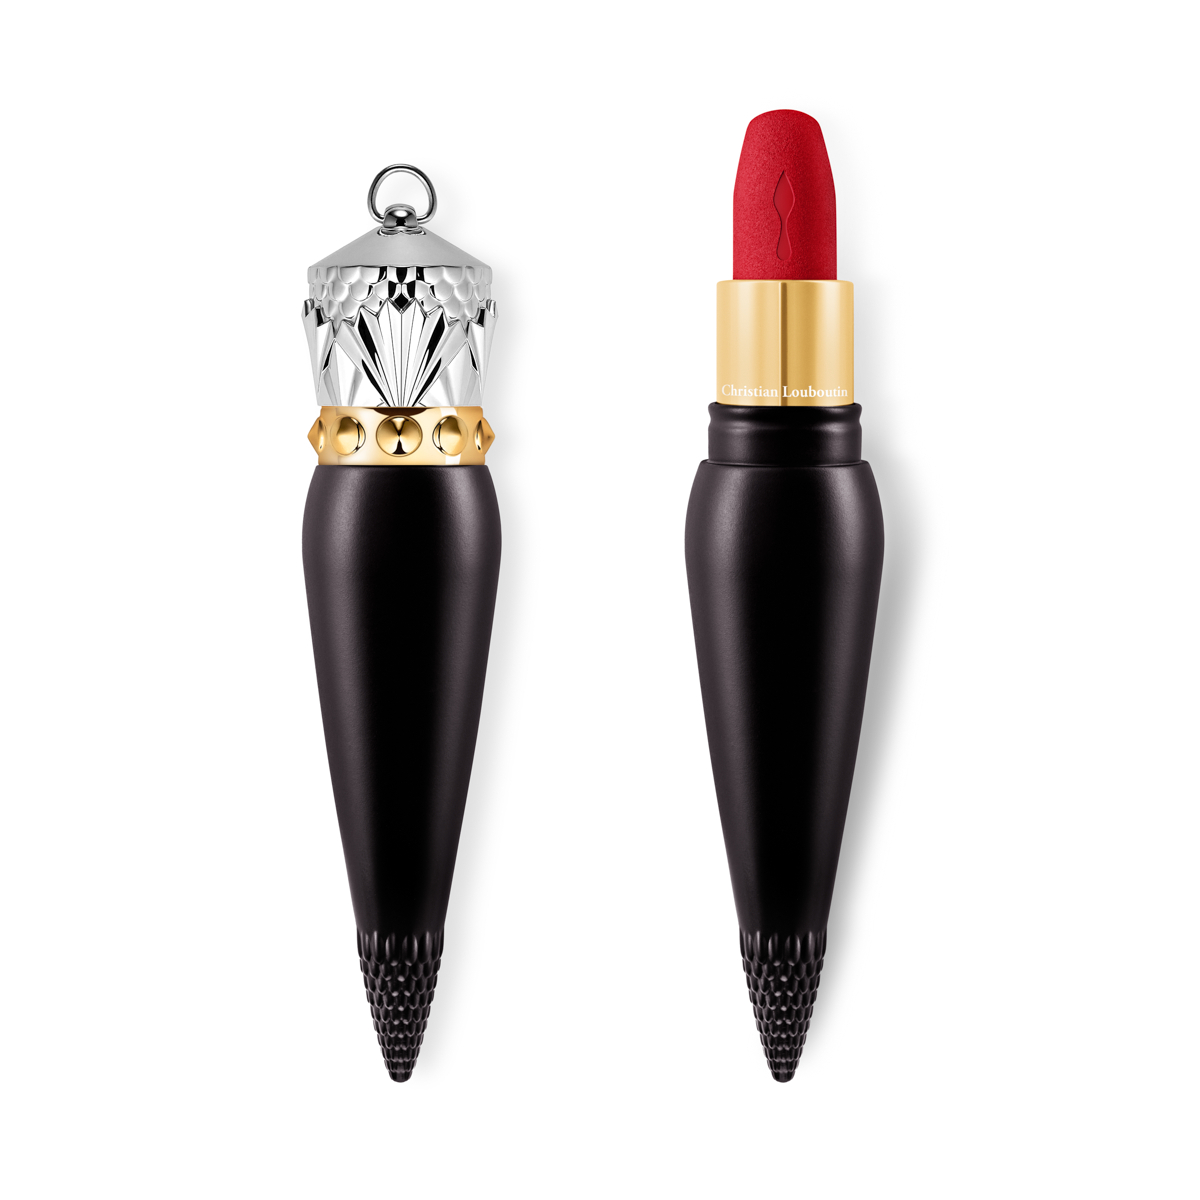 make-up, dark red kind of shade, louis vuitton, dark red, lipstick, dark  lipstick, gold make-up, louboutin - Wheretoget